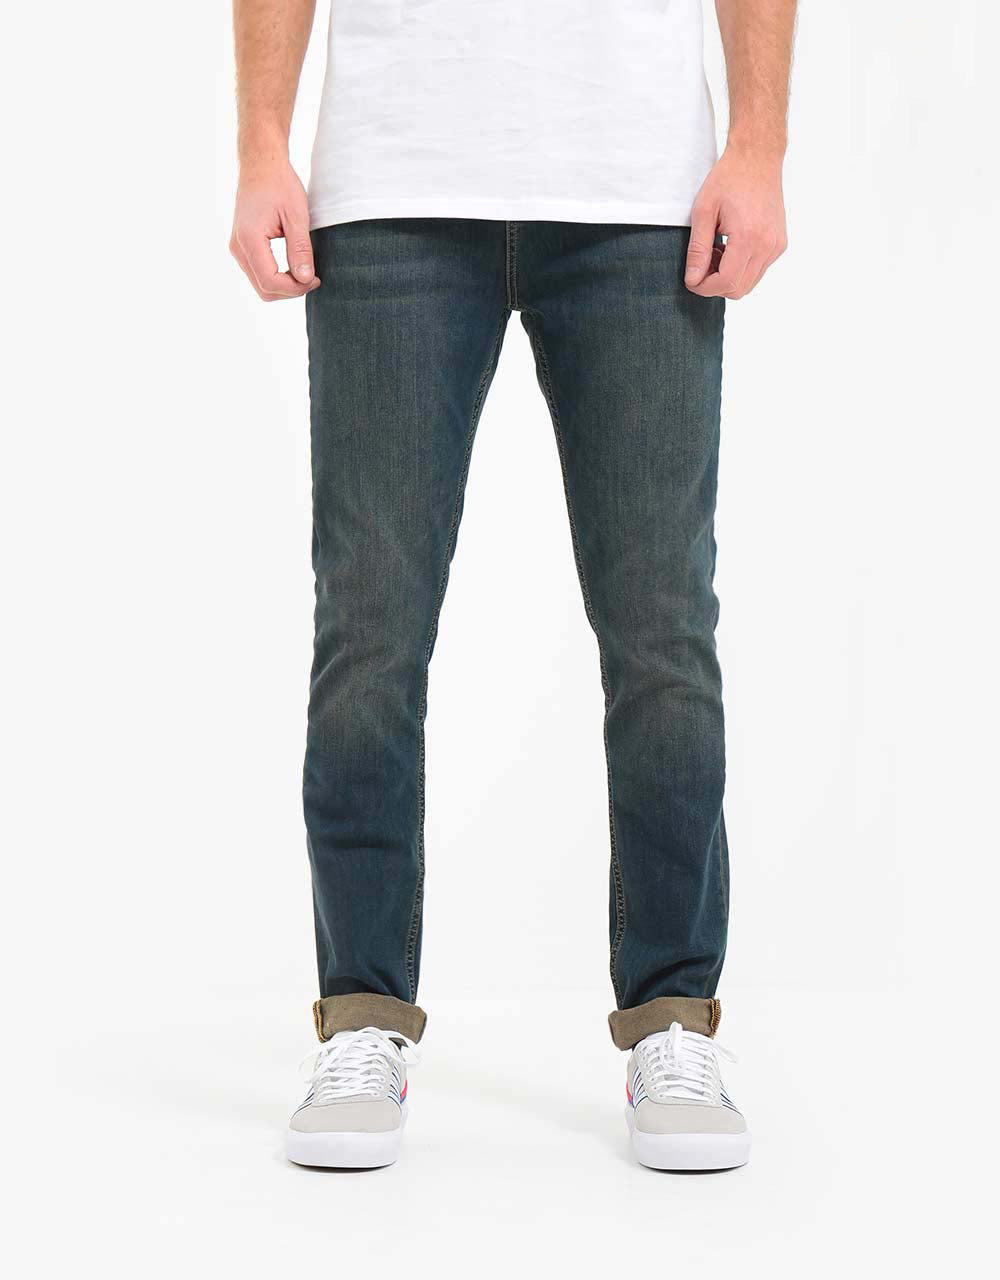 Route One Skinny Denim Jeans - Mid Wash